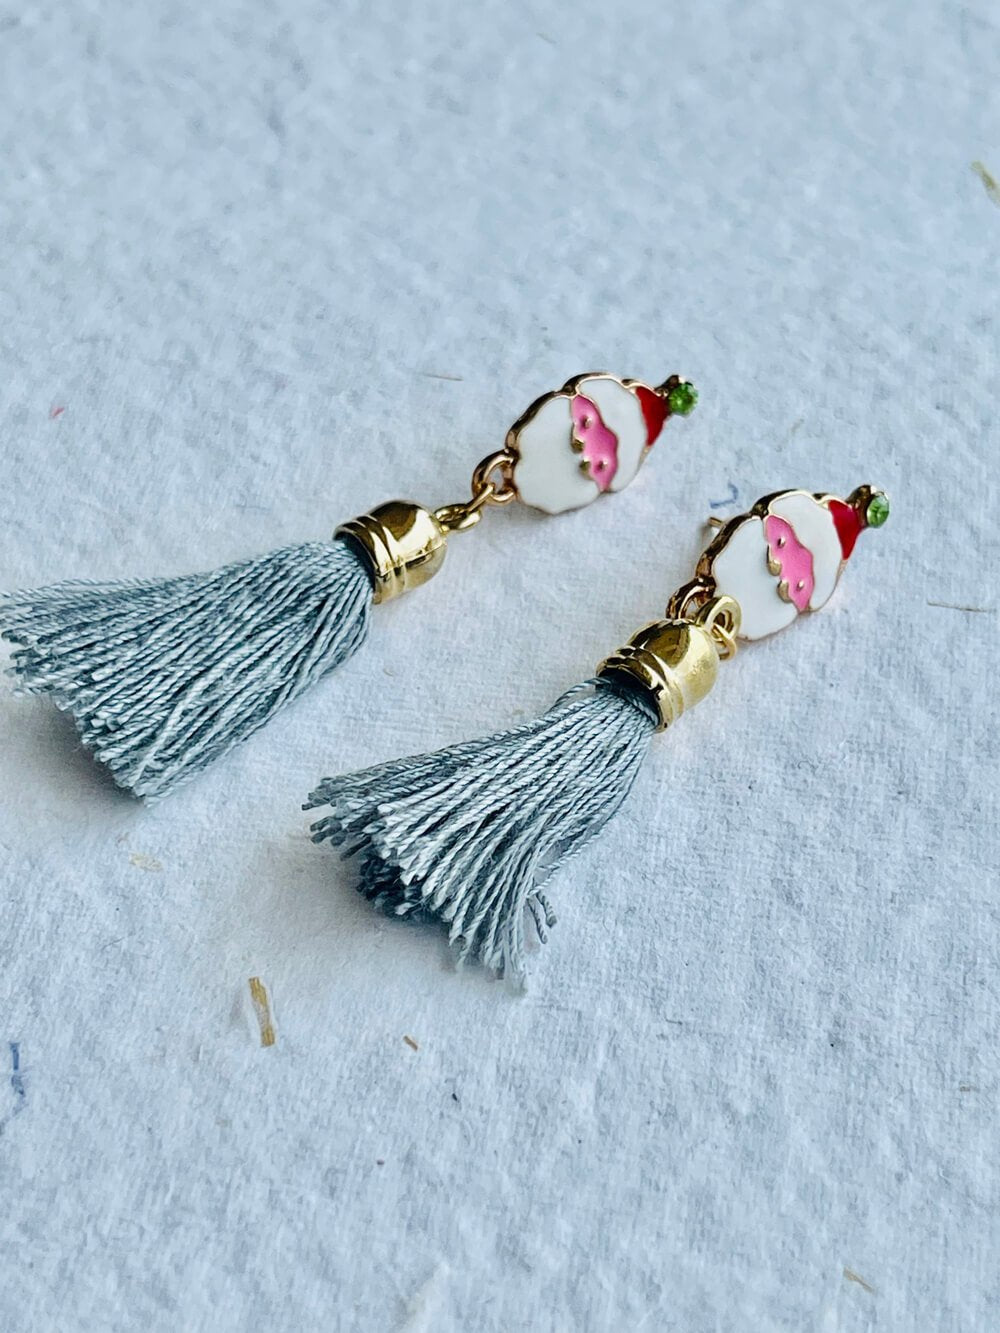 Christmas earrings accessories party wear, Grey Flowy hanging Santa Claus - Little Surprise BoxChristmas earrings accessories party wear, Grey Flowy hanging Santa Claus